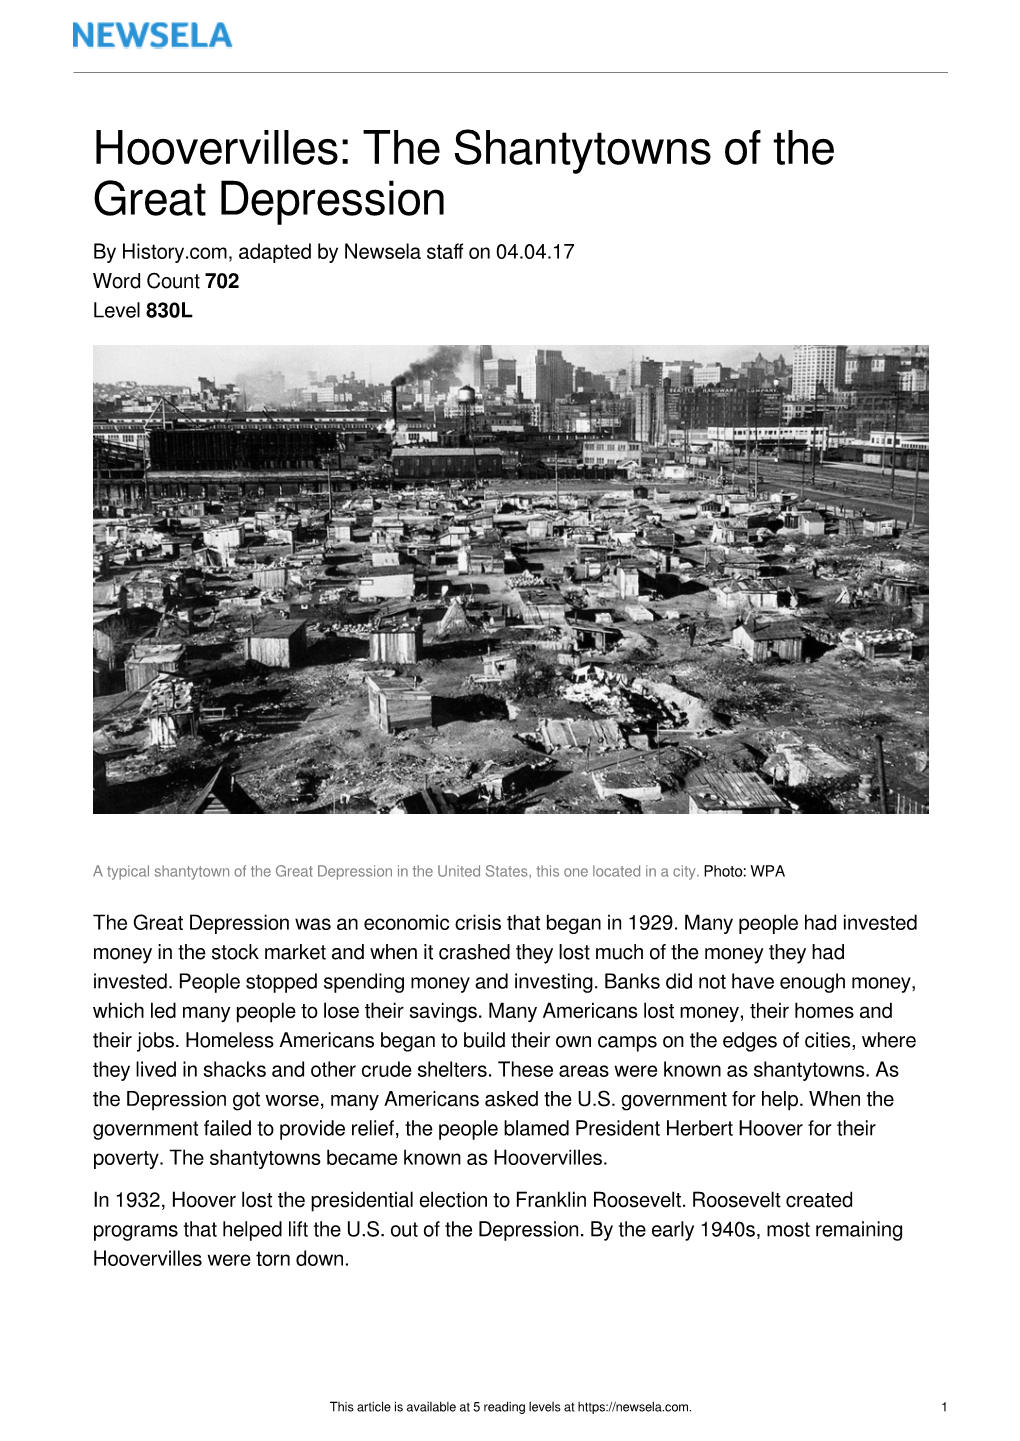 Hoovervilles: the Shantytowns of the Great Depression by History.Com, Adapted by Newsela Staﬀ on 04.04.17 Word Count 702 Level 830L